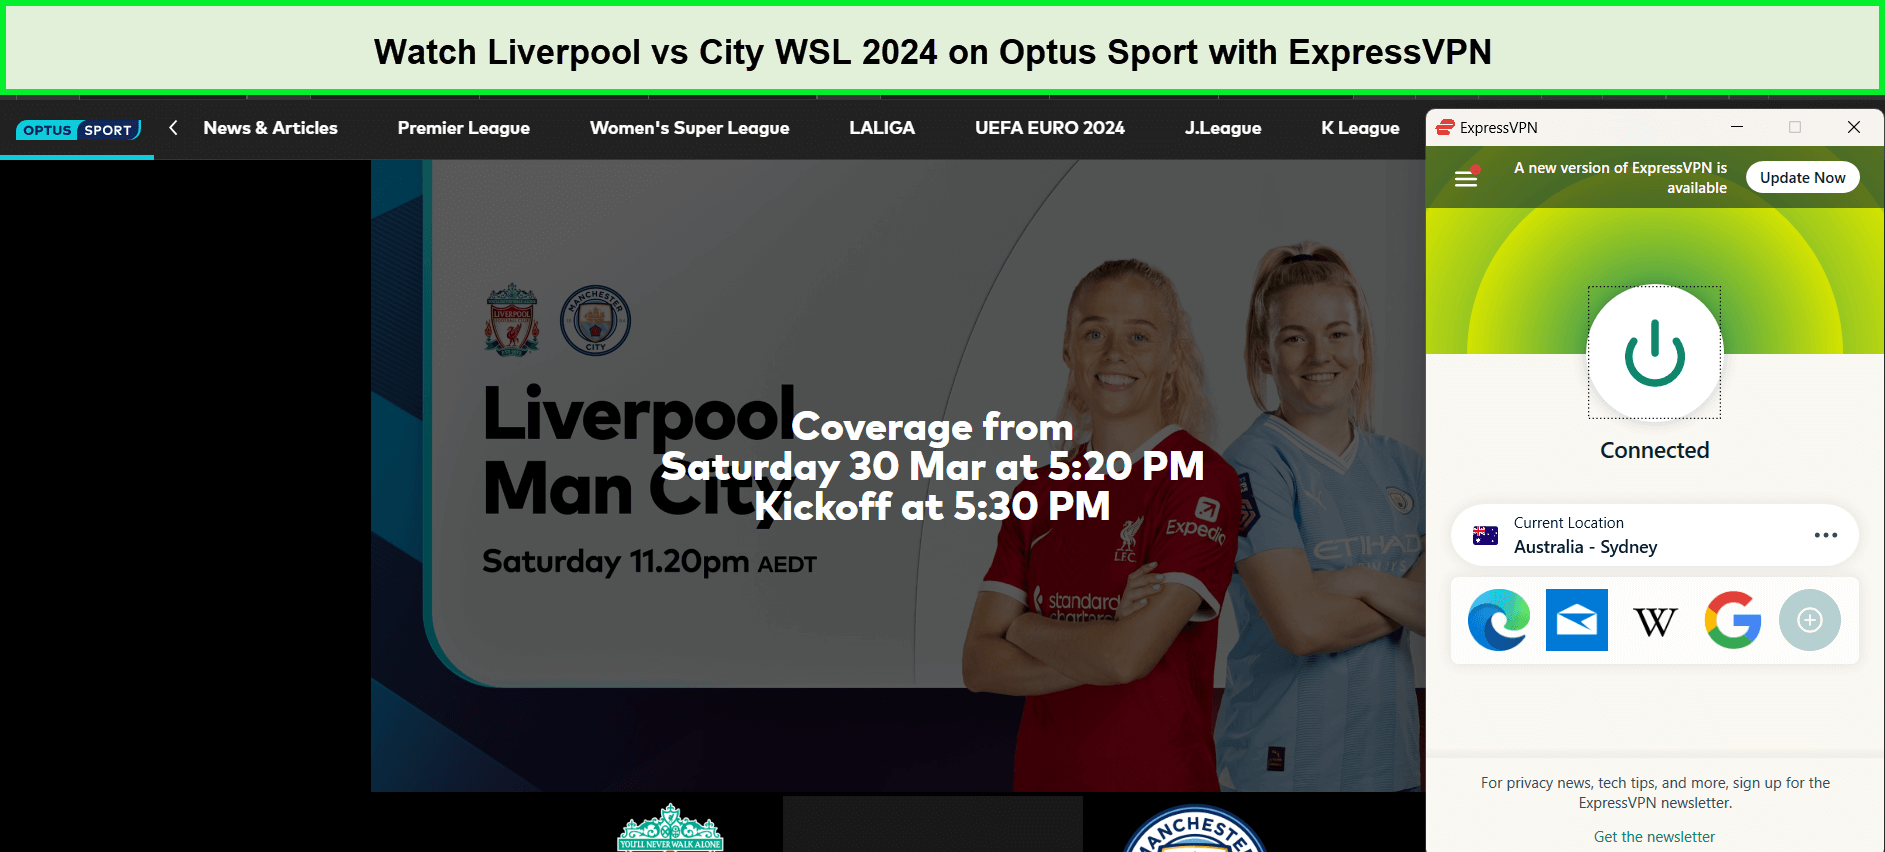 watch-Liverpool-vs-City-WSL-2024-in-USA-on-Optus-Sport-with-expressvpn